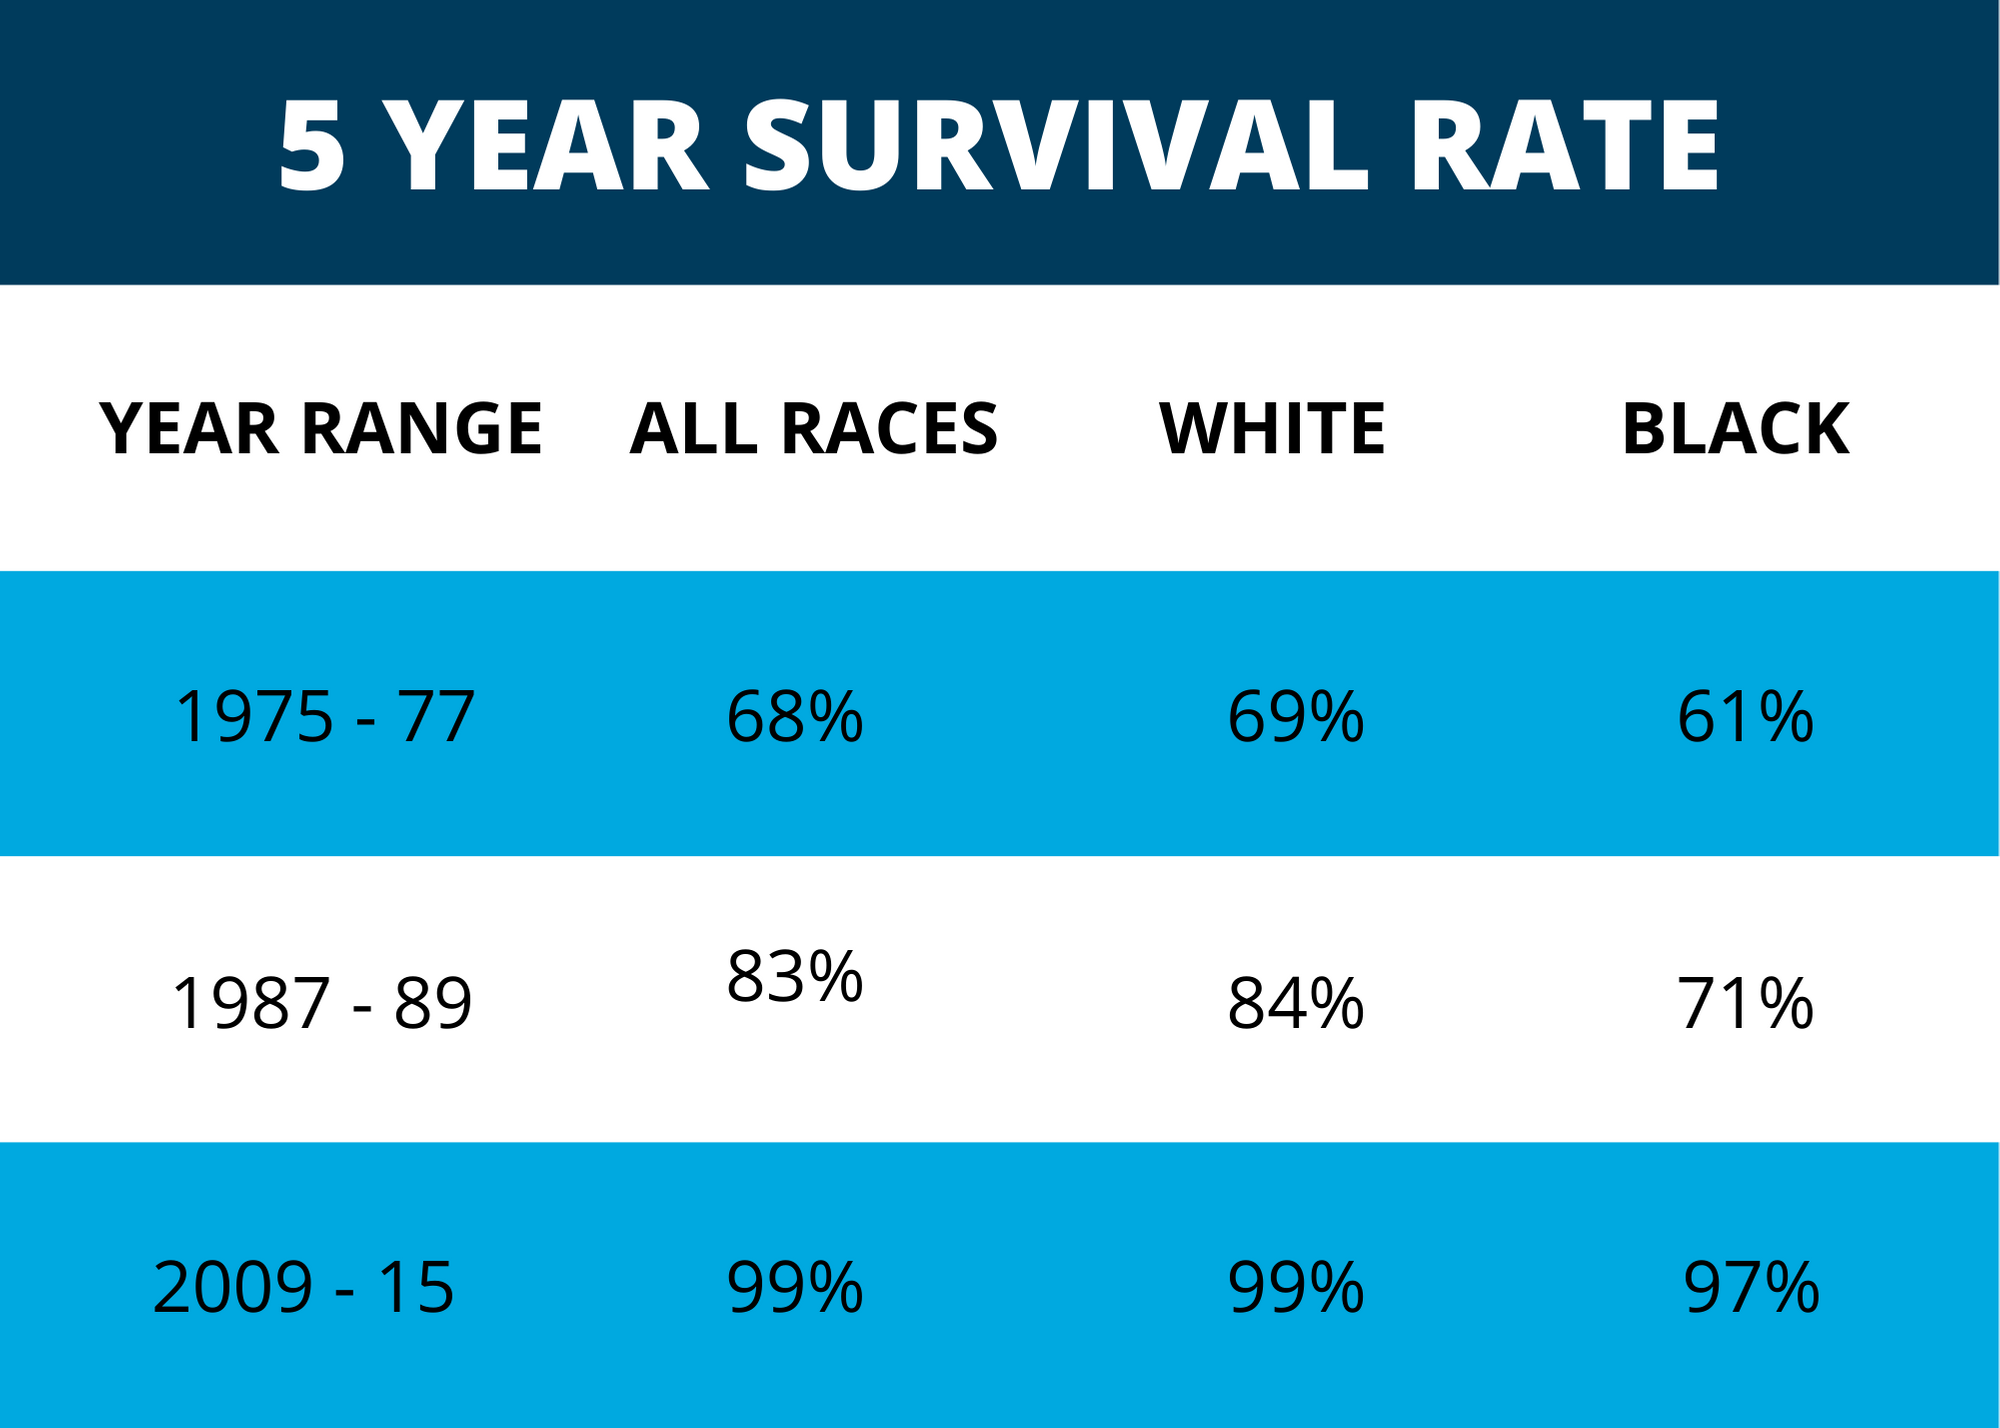 5 Year Survival Rate Facts and Stats